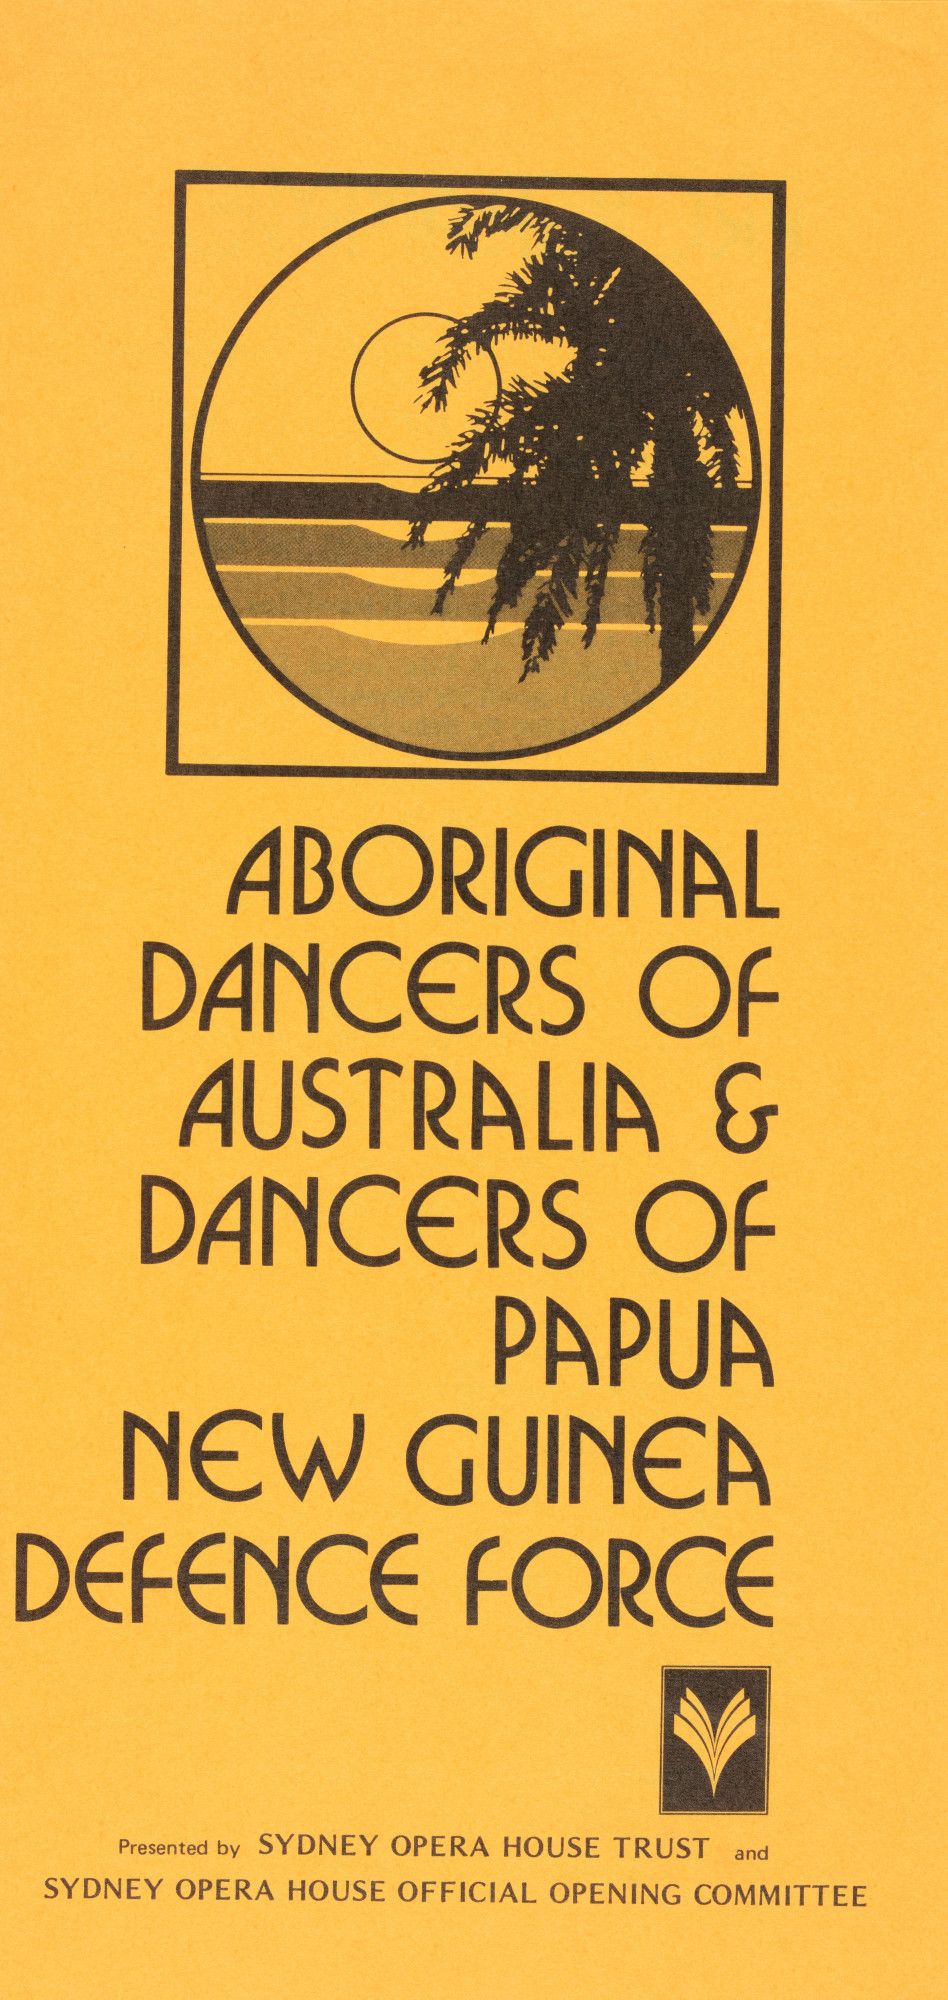 A narrow rectangular yellow page in vertical format is printed in black with a stylized picture contained within a circle within a square, of a sun above waves with a palm tree in silhouette to the side, and below that the title Aboriginal dancers of Australia and dancers of Papua New Guinea Defence Force. Below that a small logo.